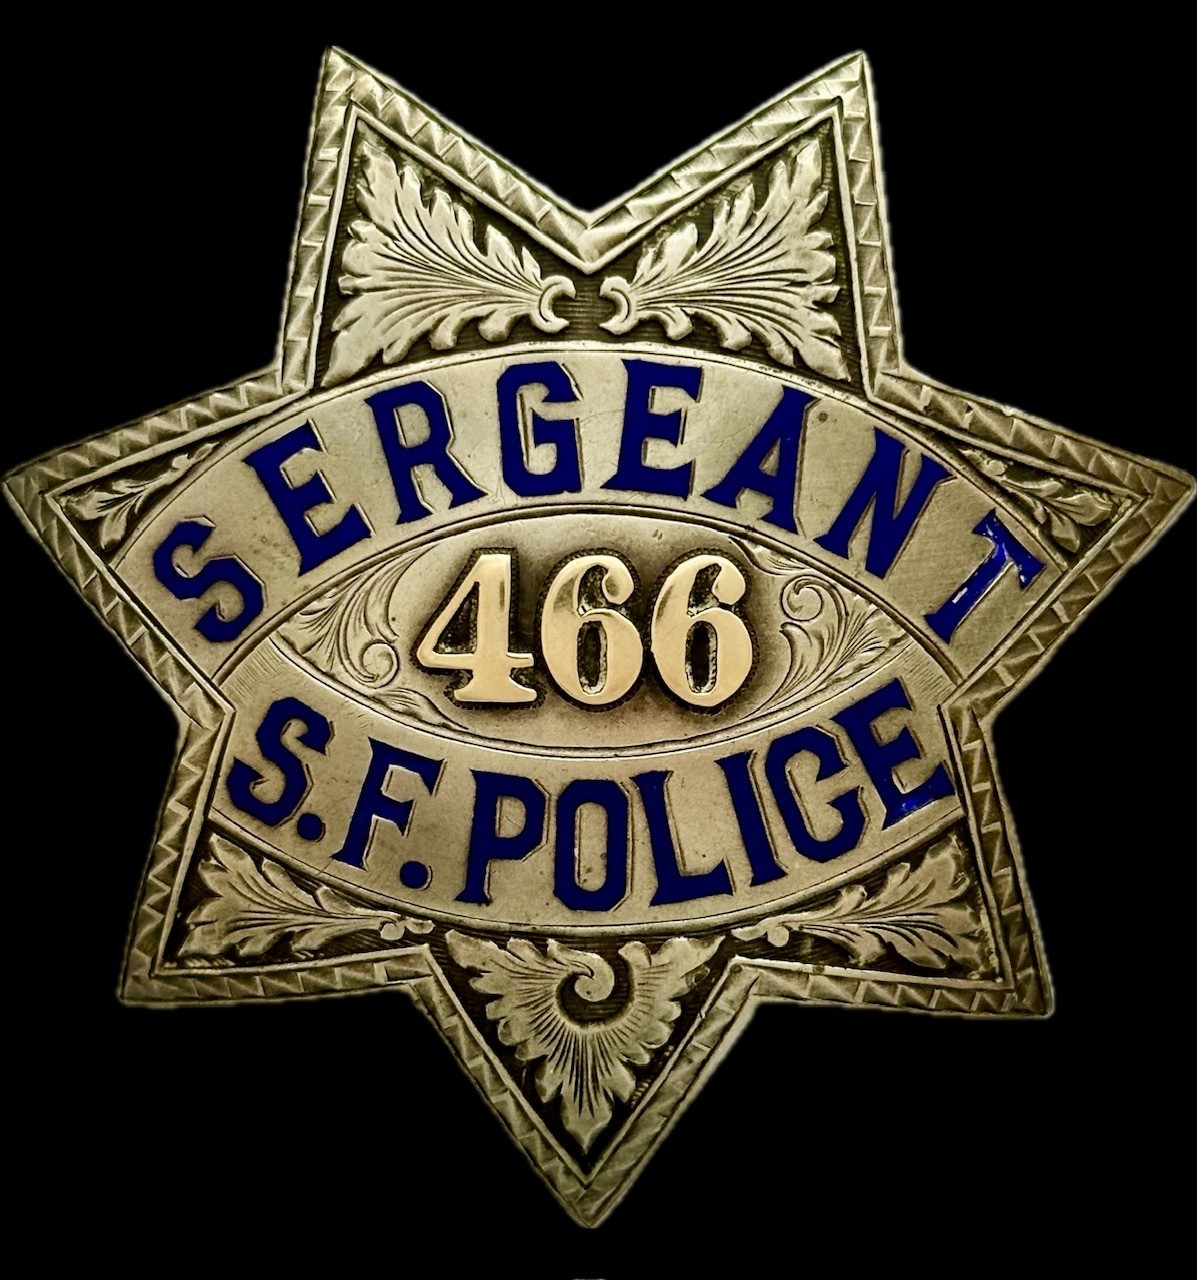 San Francisco Police Sergeant star #466 with presentation on reverse:  Presented to John J. O’Connell By Members of Co. A. 7-1-54.  Made by Irvine & Jachens S. F. and dated 6-30-54.  Jewelry Workers Union 70 stamp.